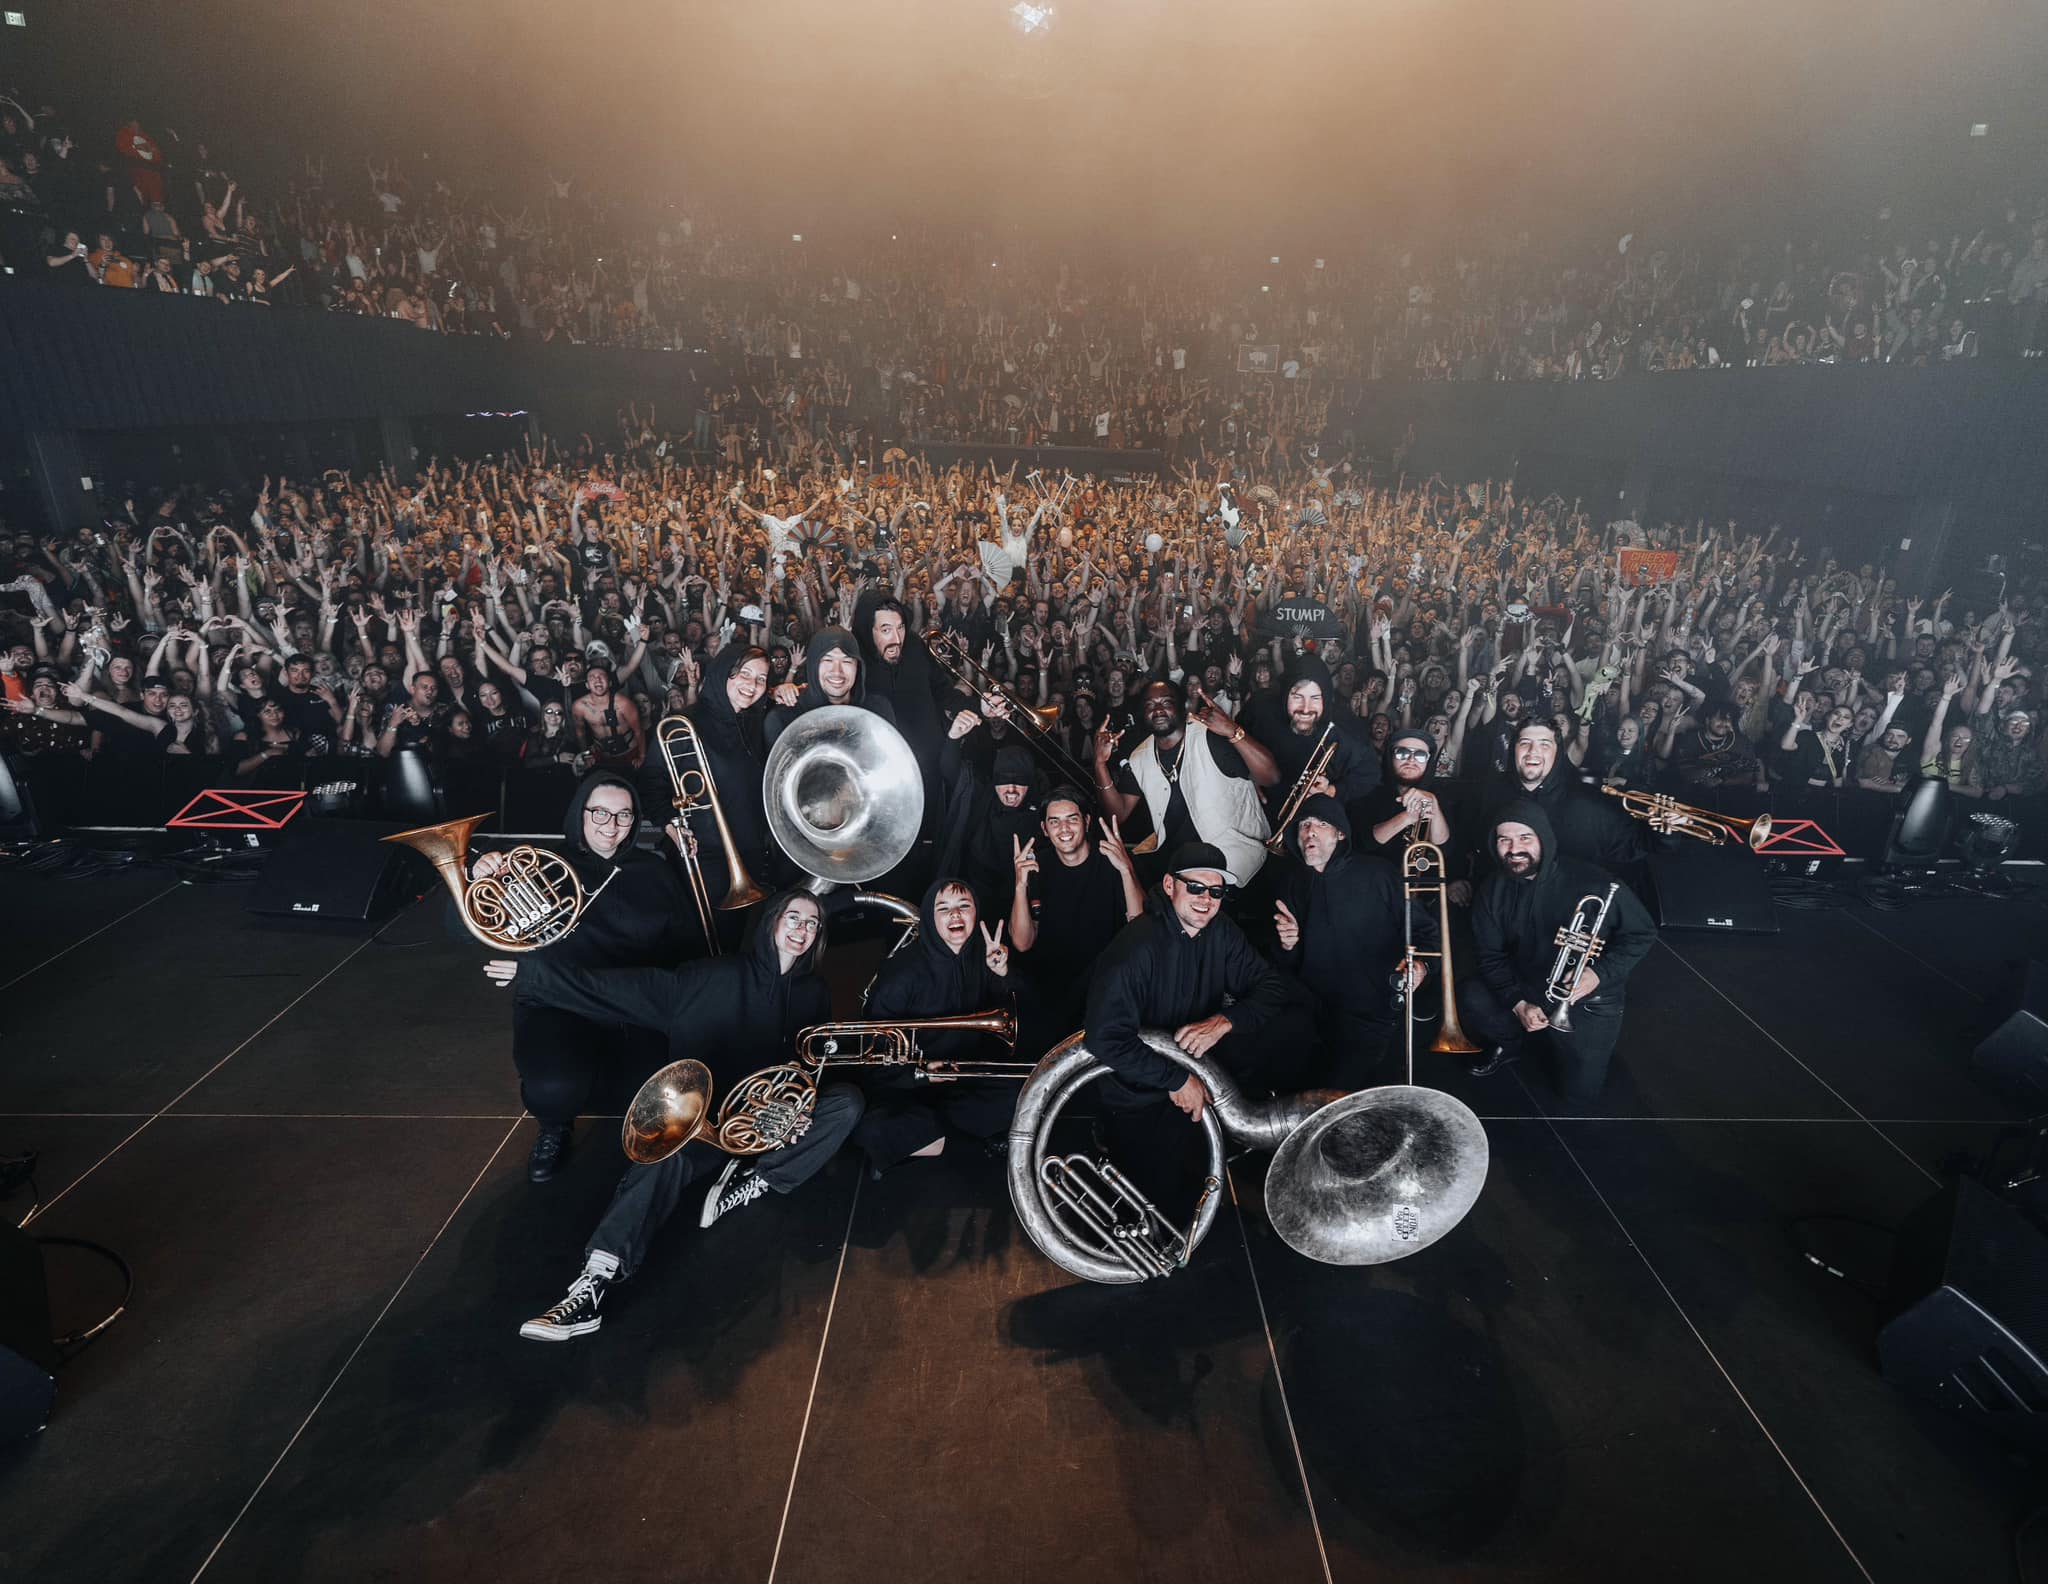 Apashe and brass orchestra posing for picture with crowd in background at Denver show